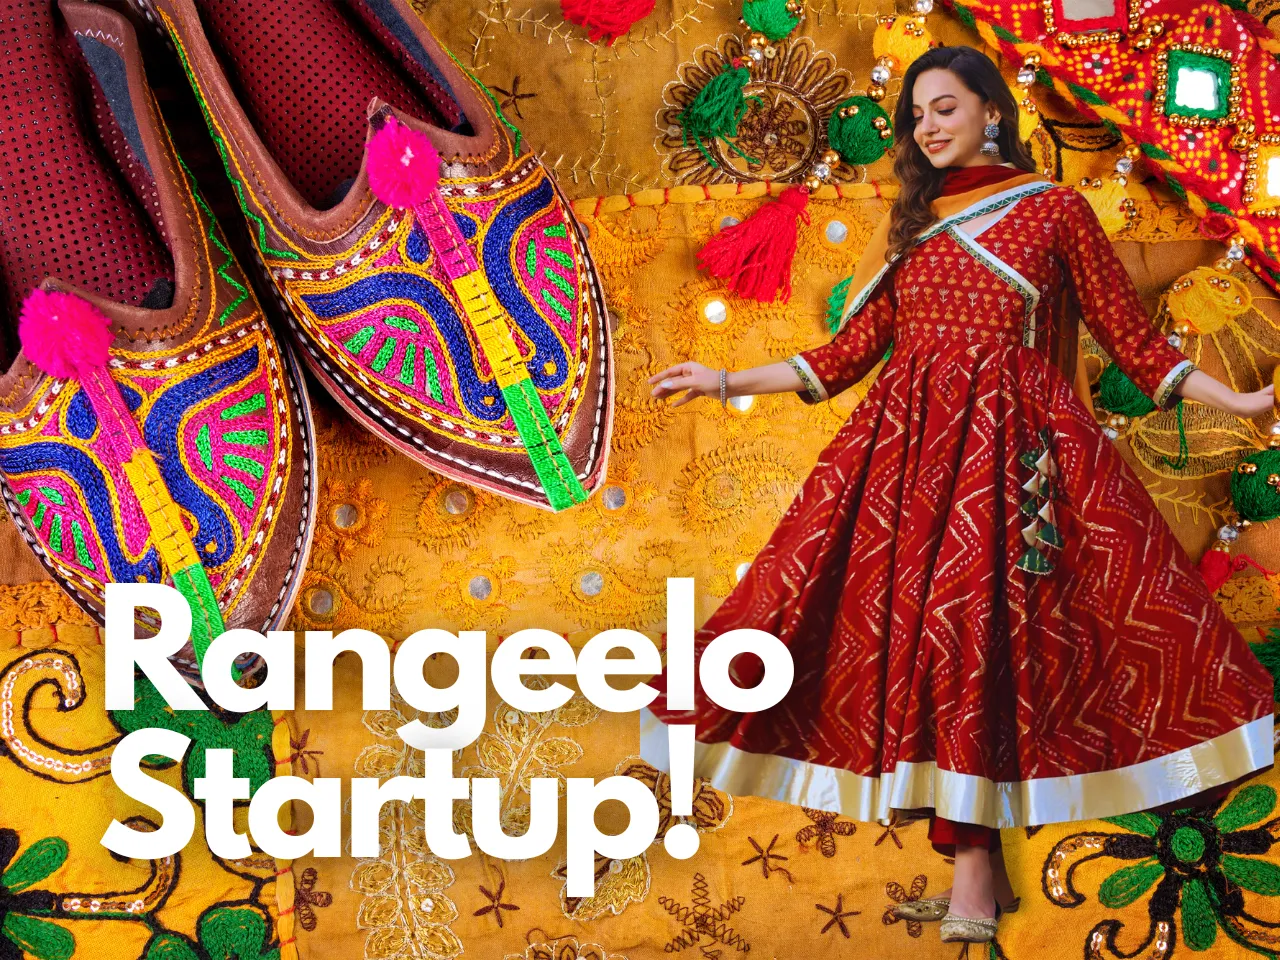 Rangeelo: A Startup Reshaping Rajasthan's Fashion Landscape